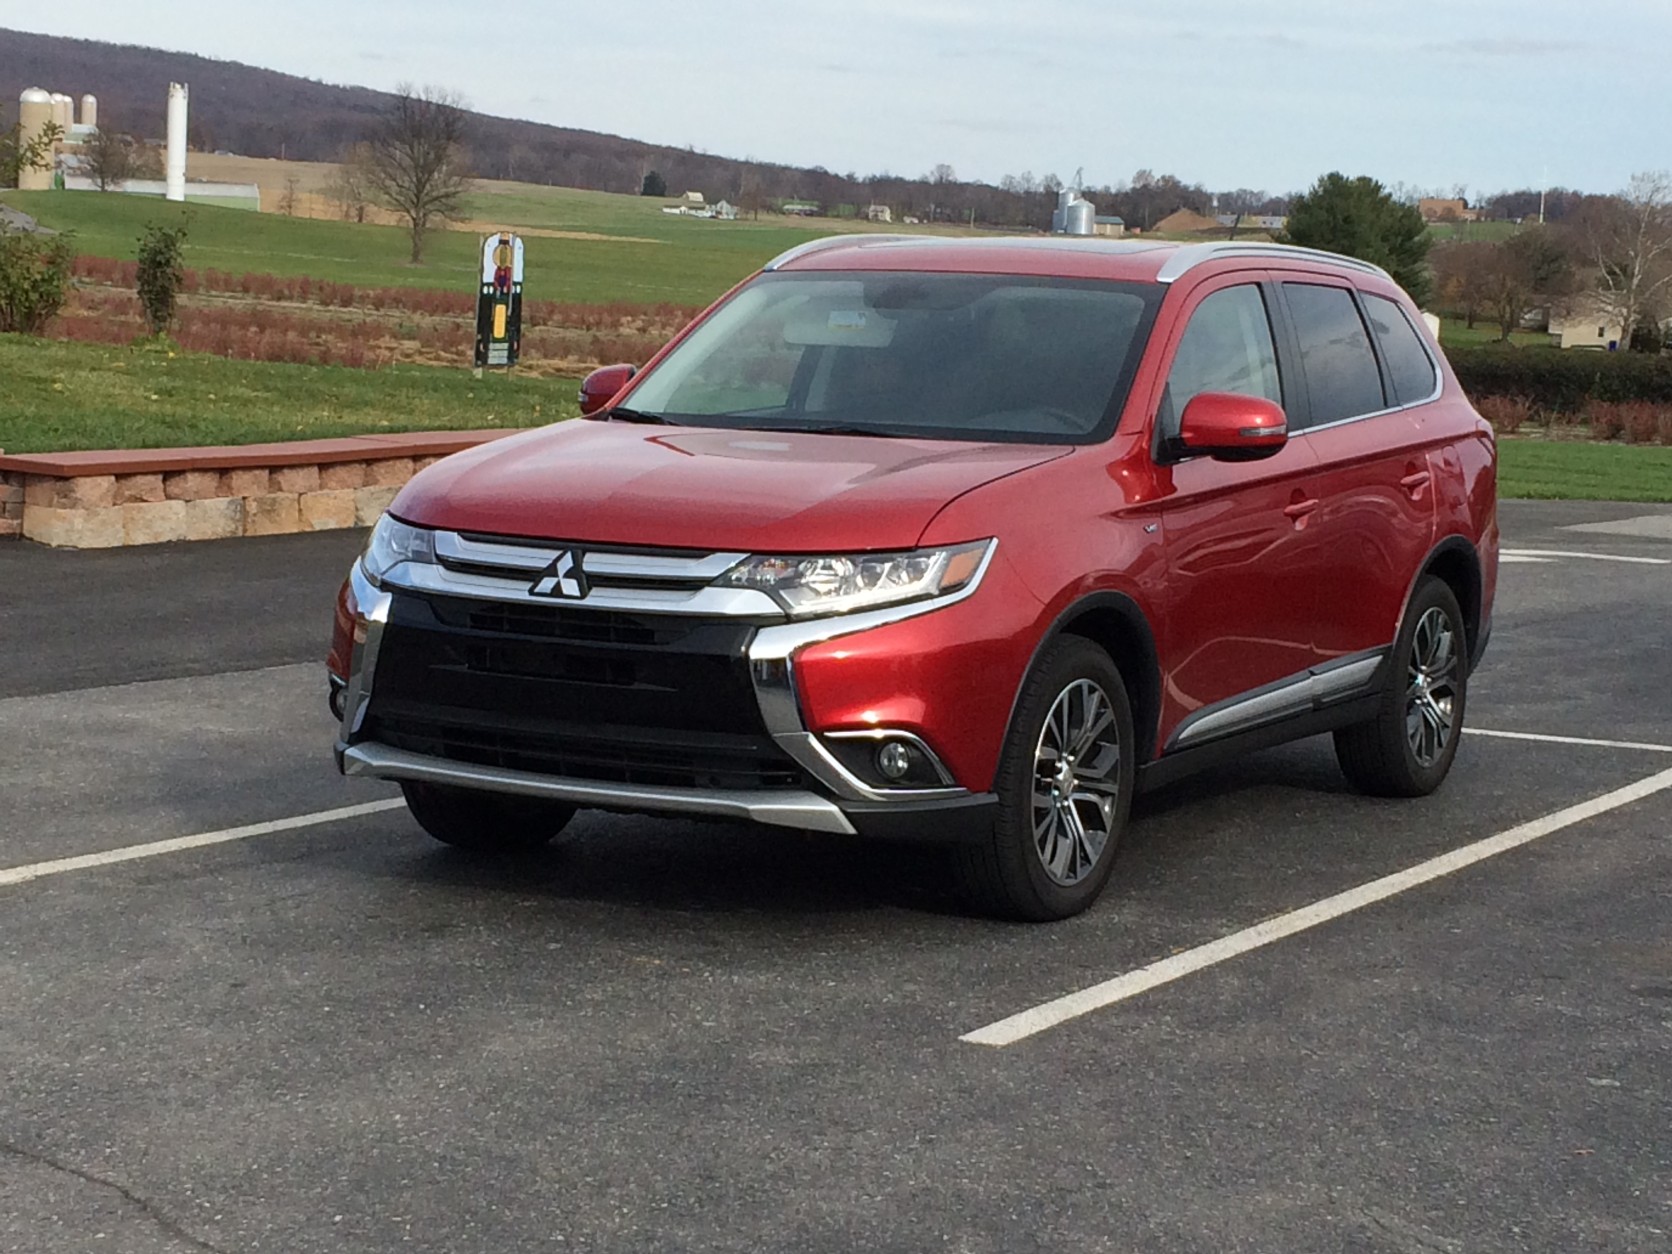 With an updated look and improved interior, it looks like Mitsubishi is making a name for itself in small crossovers. (WTOP/Mike Parris)